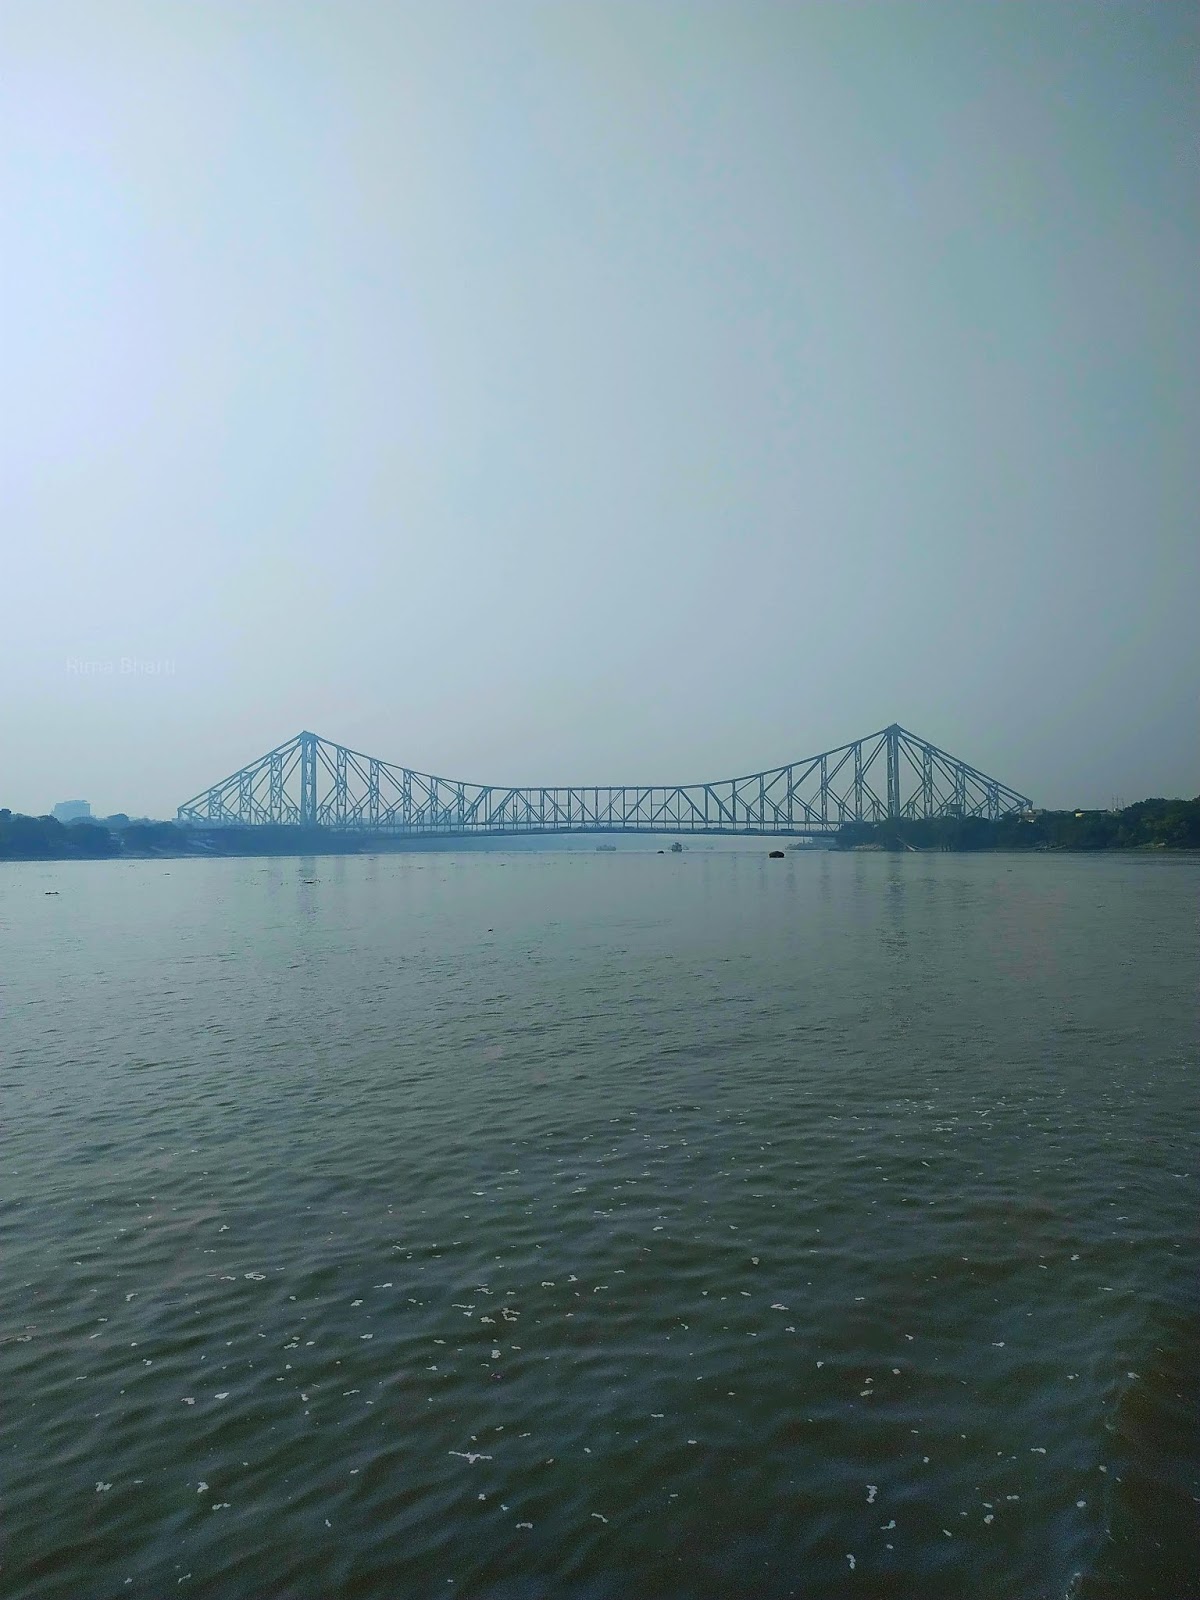 21+ Best places to visit in Kolkata